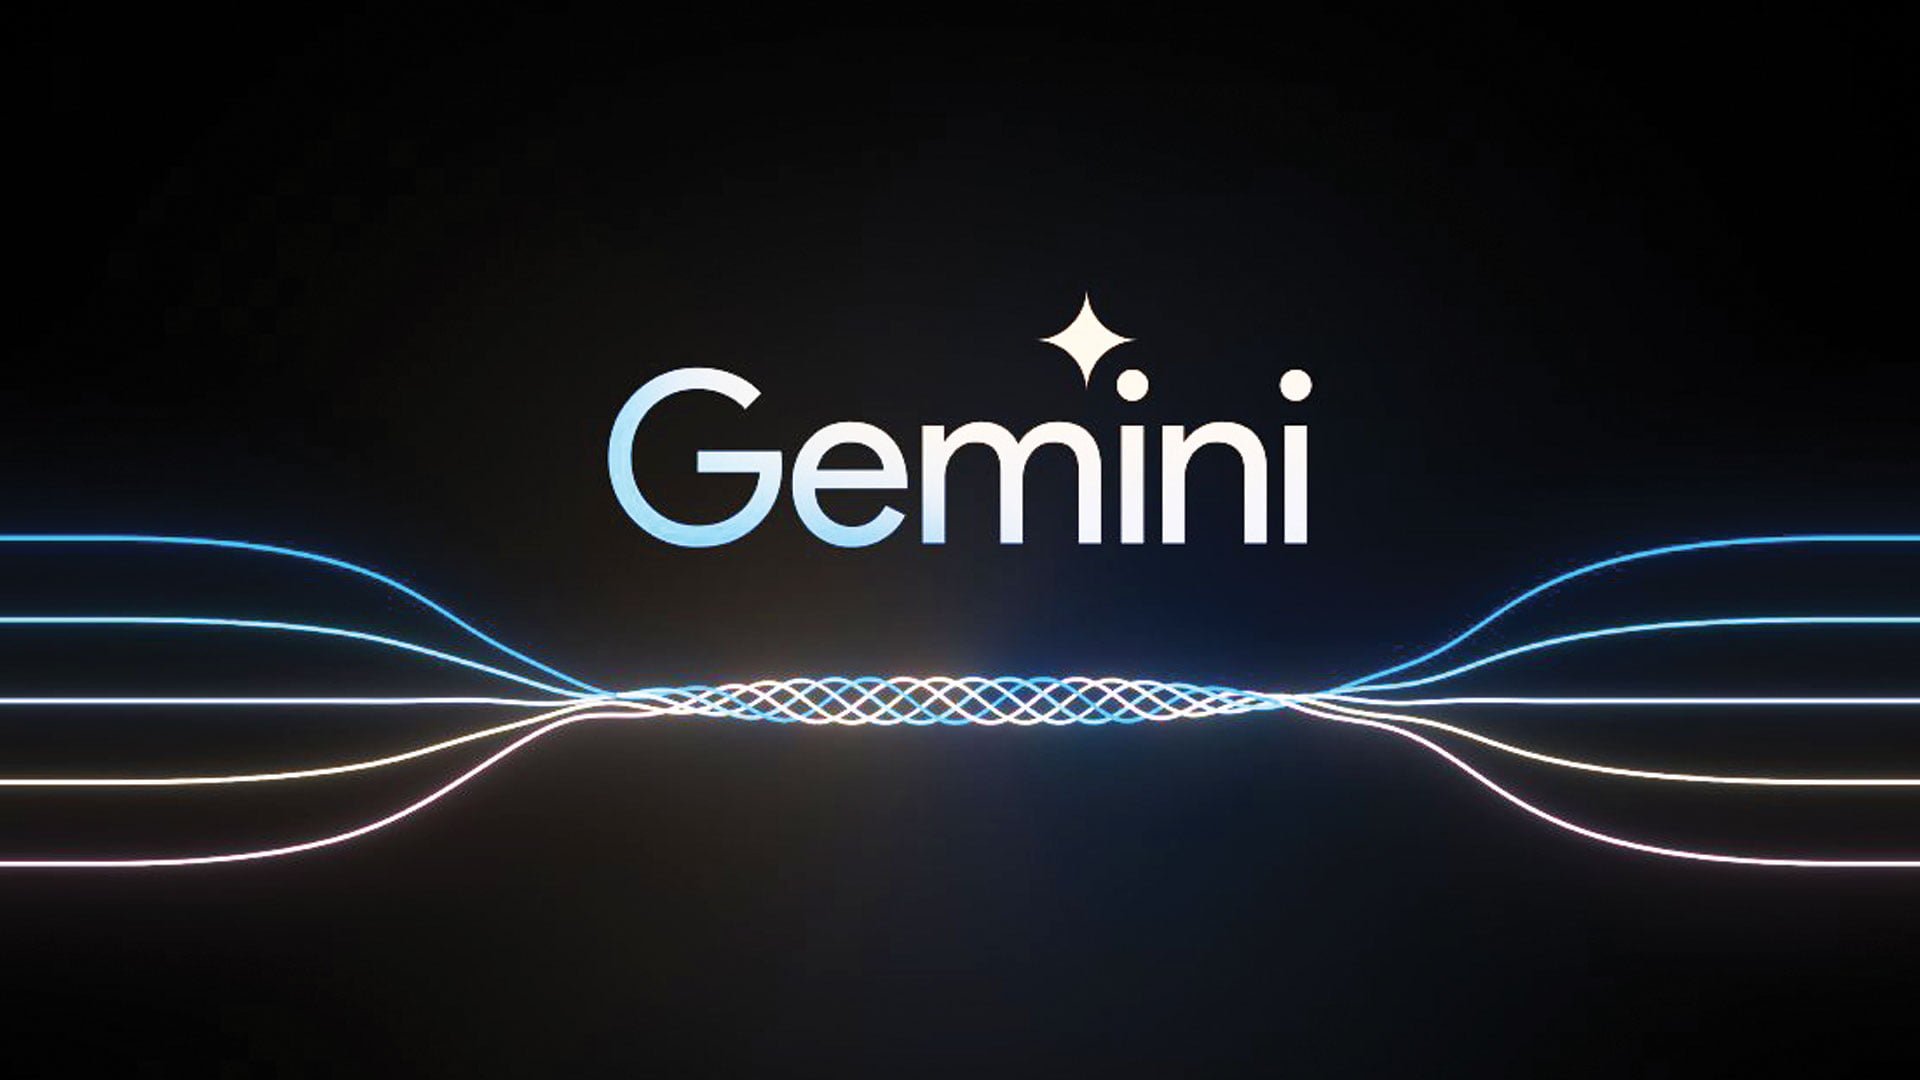 Gemini: Most Powerful and Advanced AI Model Yet